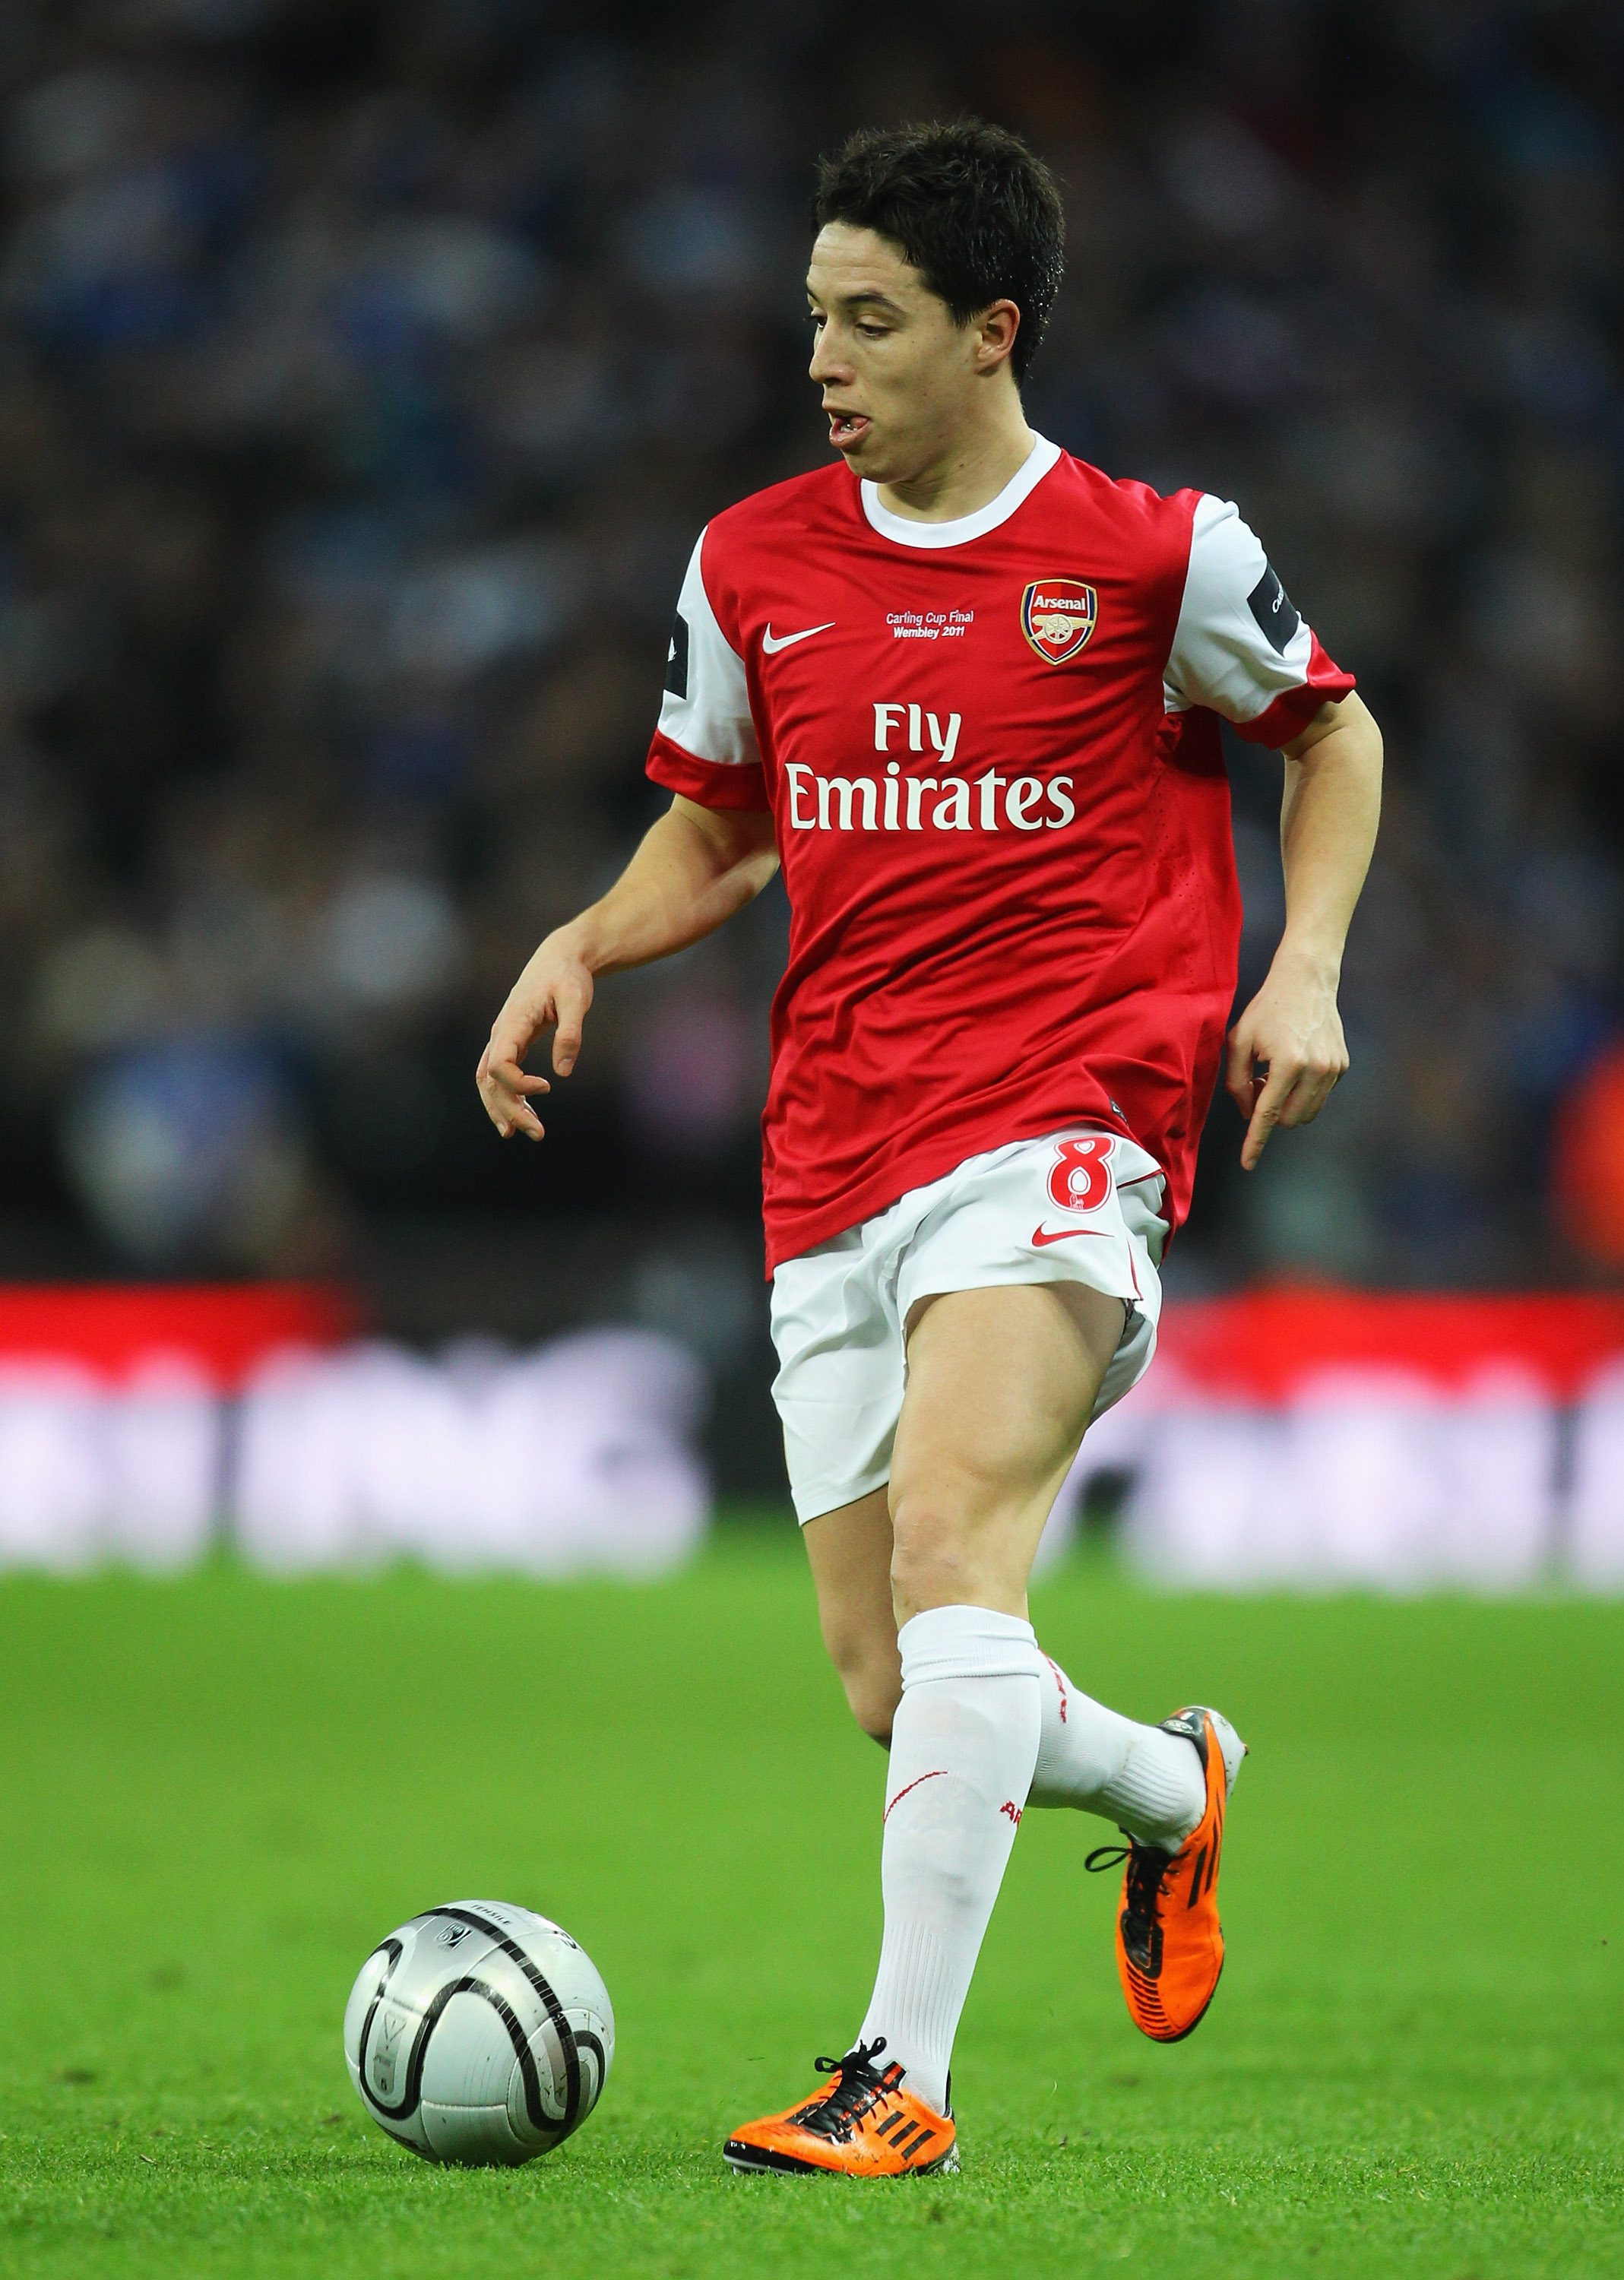 LONDON, ENGLAND - FEBRUARY 27:  Samir Nasri of Arsenal in action during the Carling Cup Final between Arsenal and Birmingham City at Wembley Stadium on February 27, 2011 in London, England.  (Photo by Alex Livesey/Getty Images)